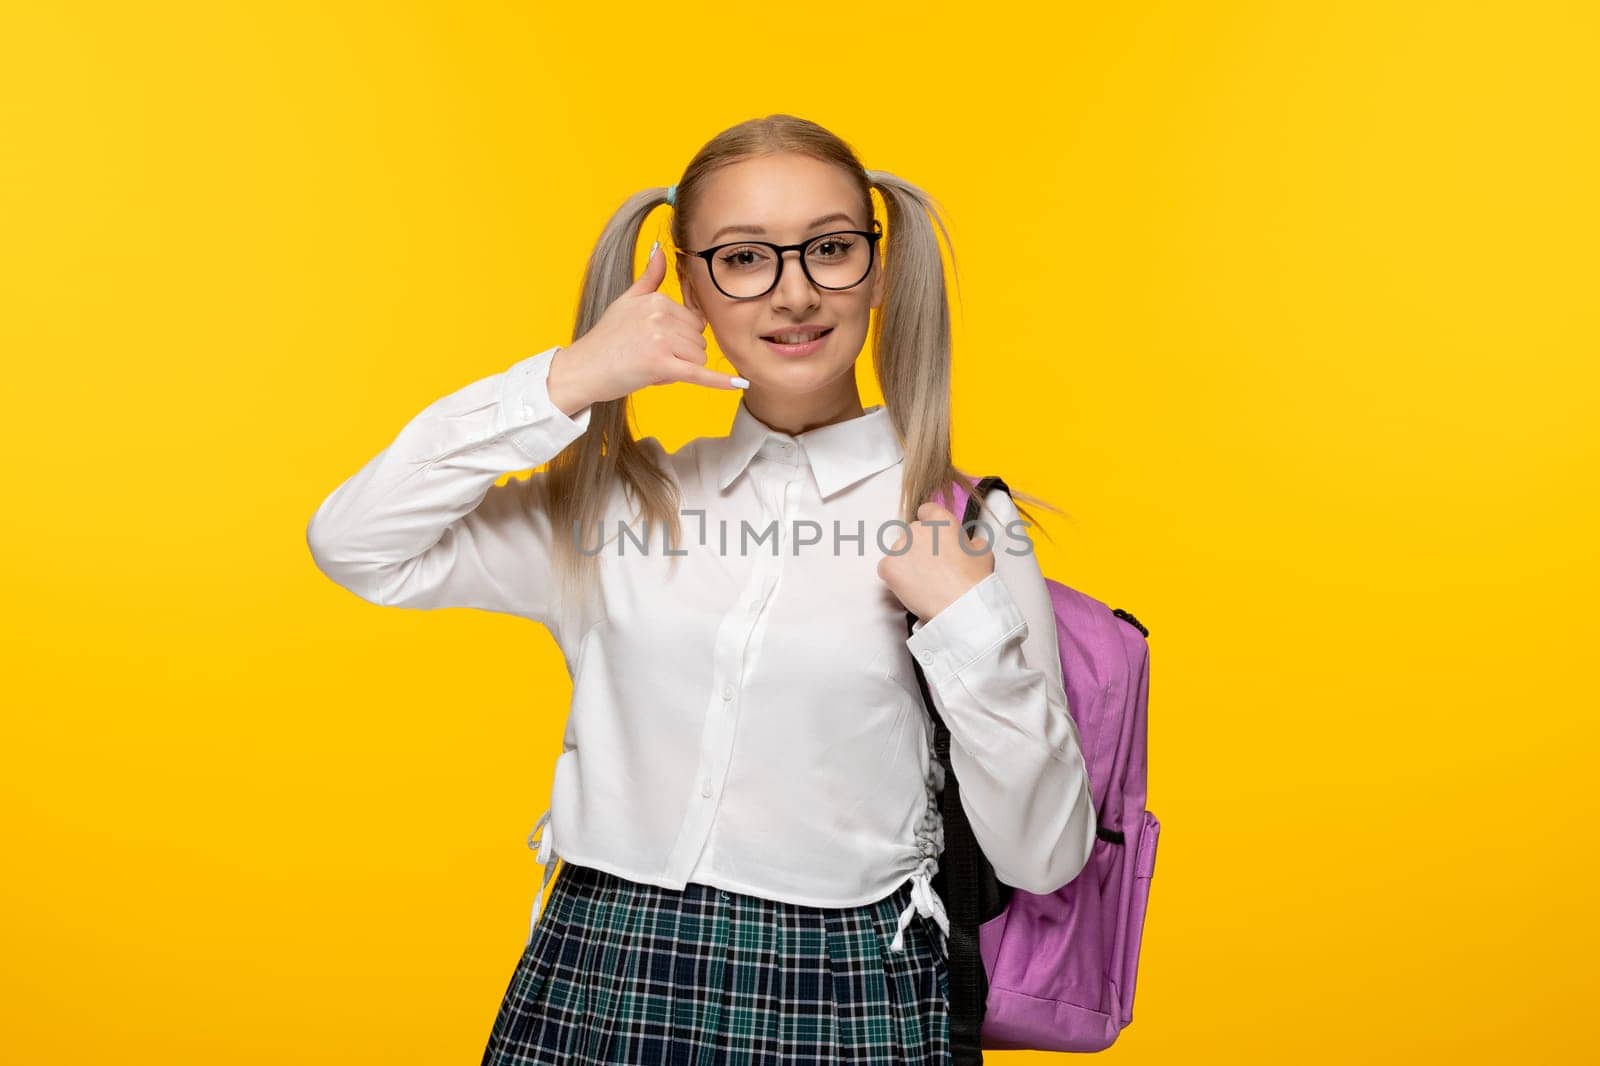 world book day blonde happy schoolgirl in uniform on yellow background showing calling gesture sign by Kamran